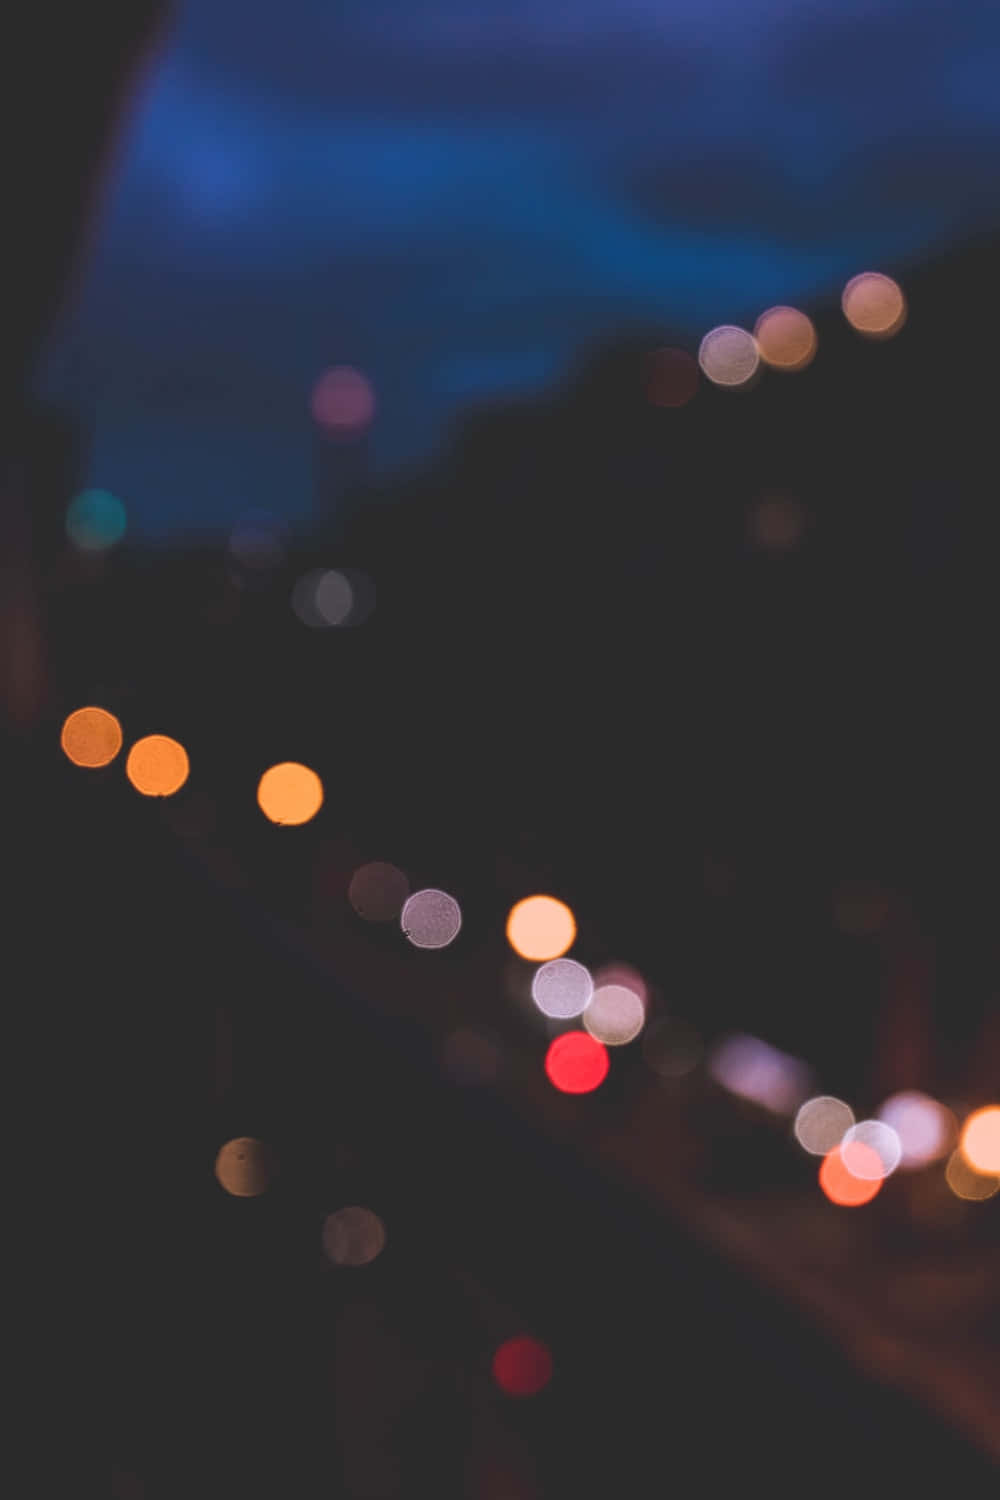 Blurred Lights In The City At Night Wallpaper